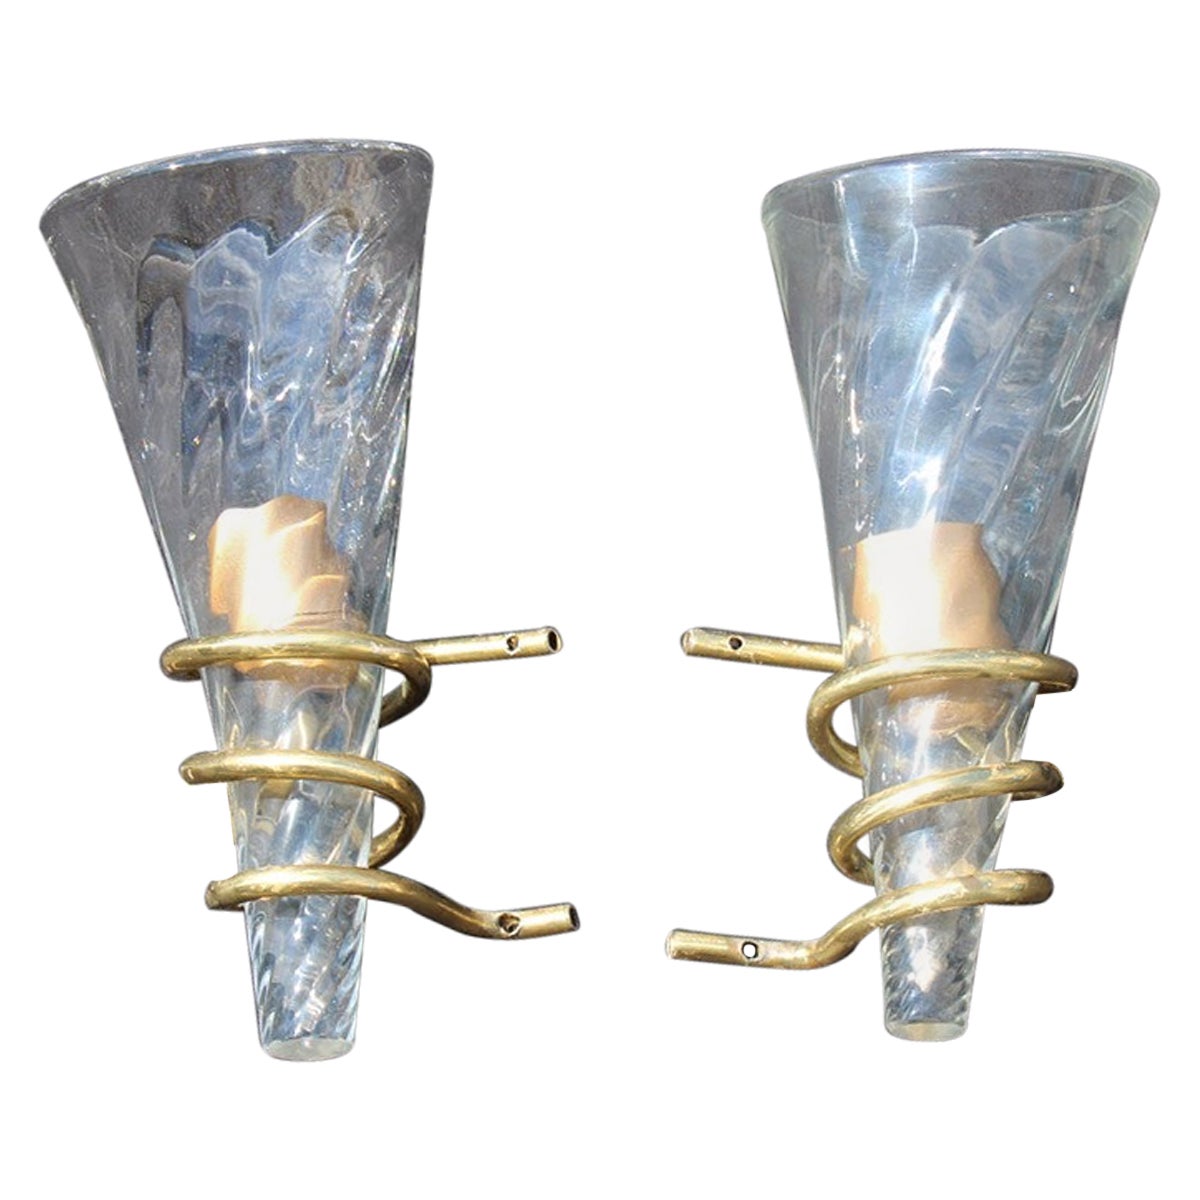 Pair of Spiral Wall Lamps in Murano Glass and Brass, Italy, 1970